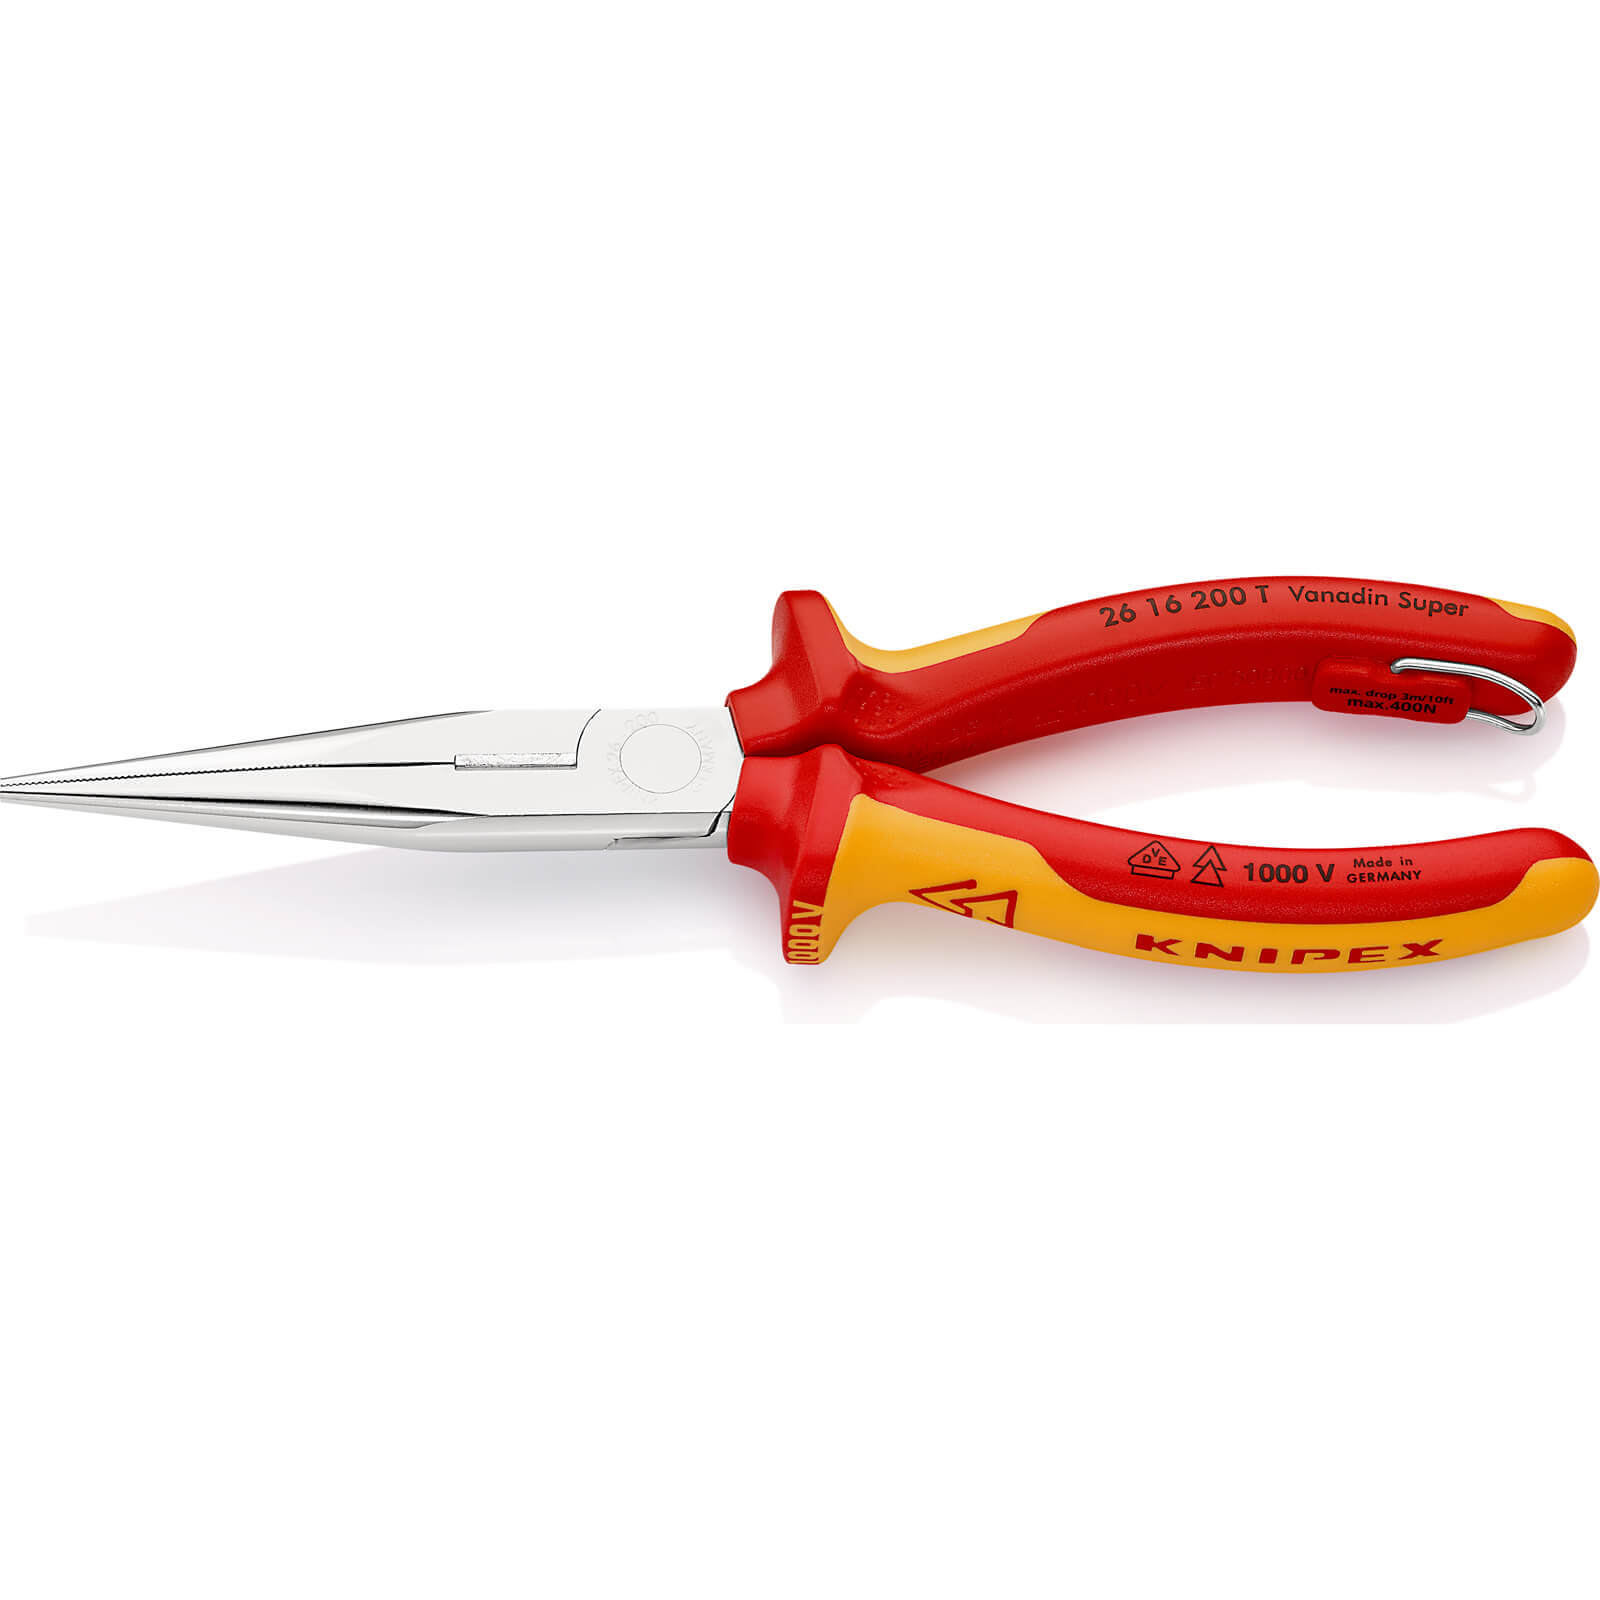 Photo of Knipex 26 16 Vde Insulated Long Nose Tethered Side Cutting Pliers 200mm